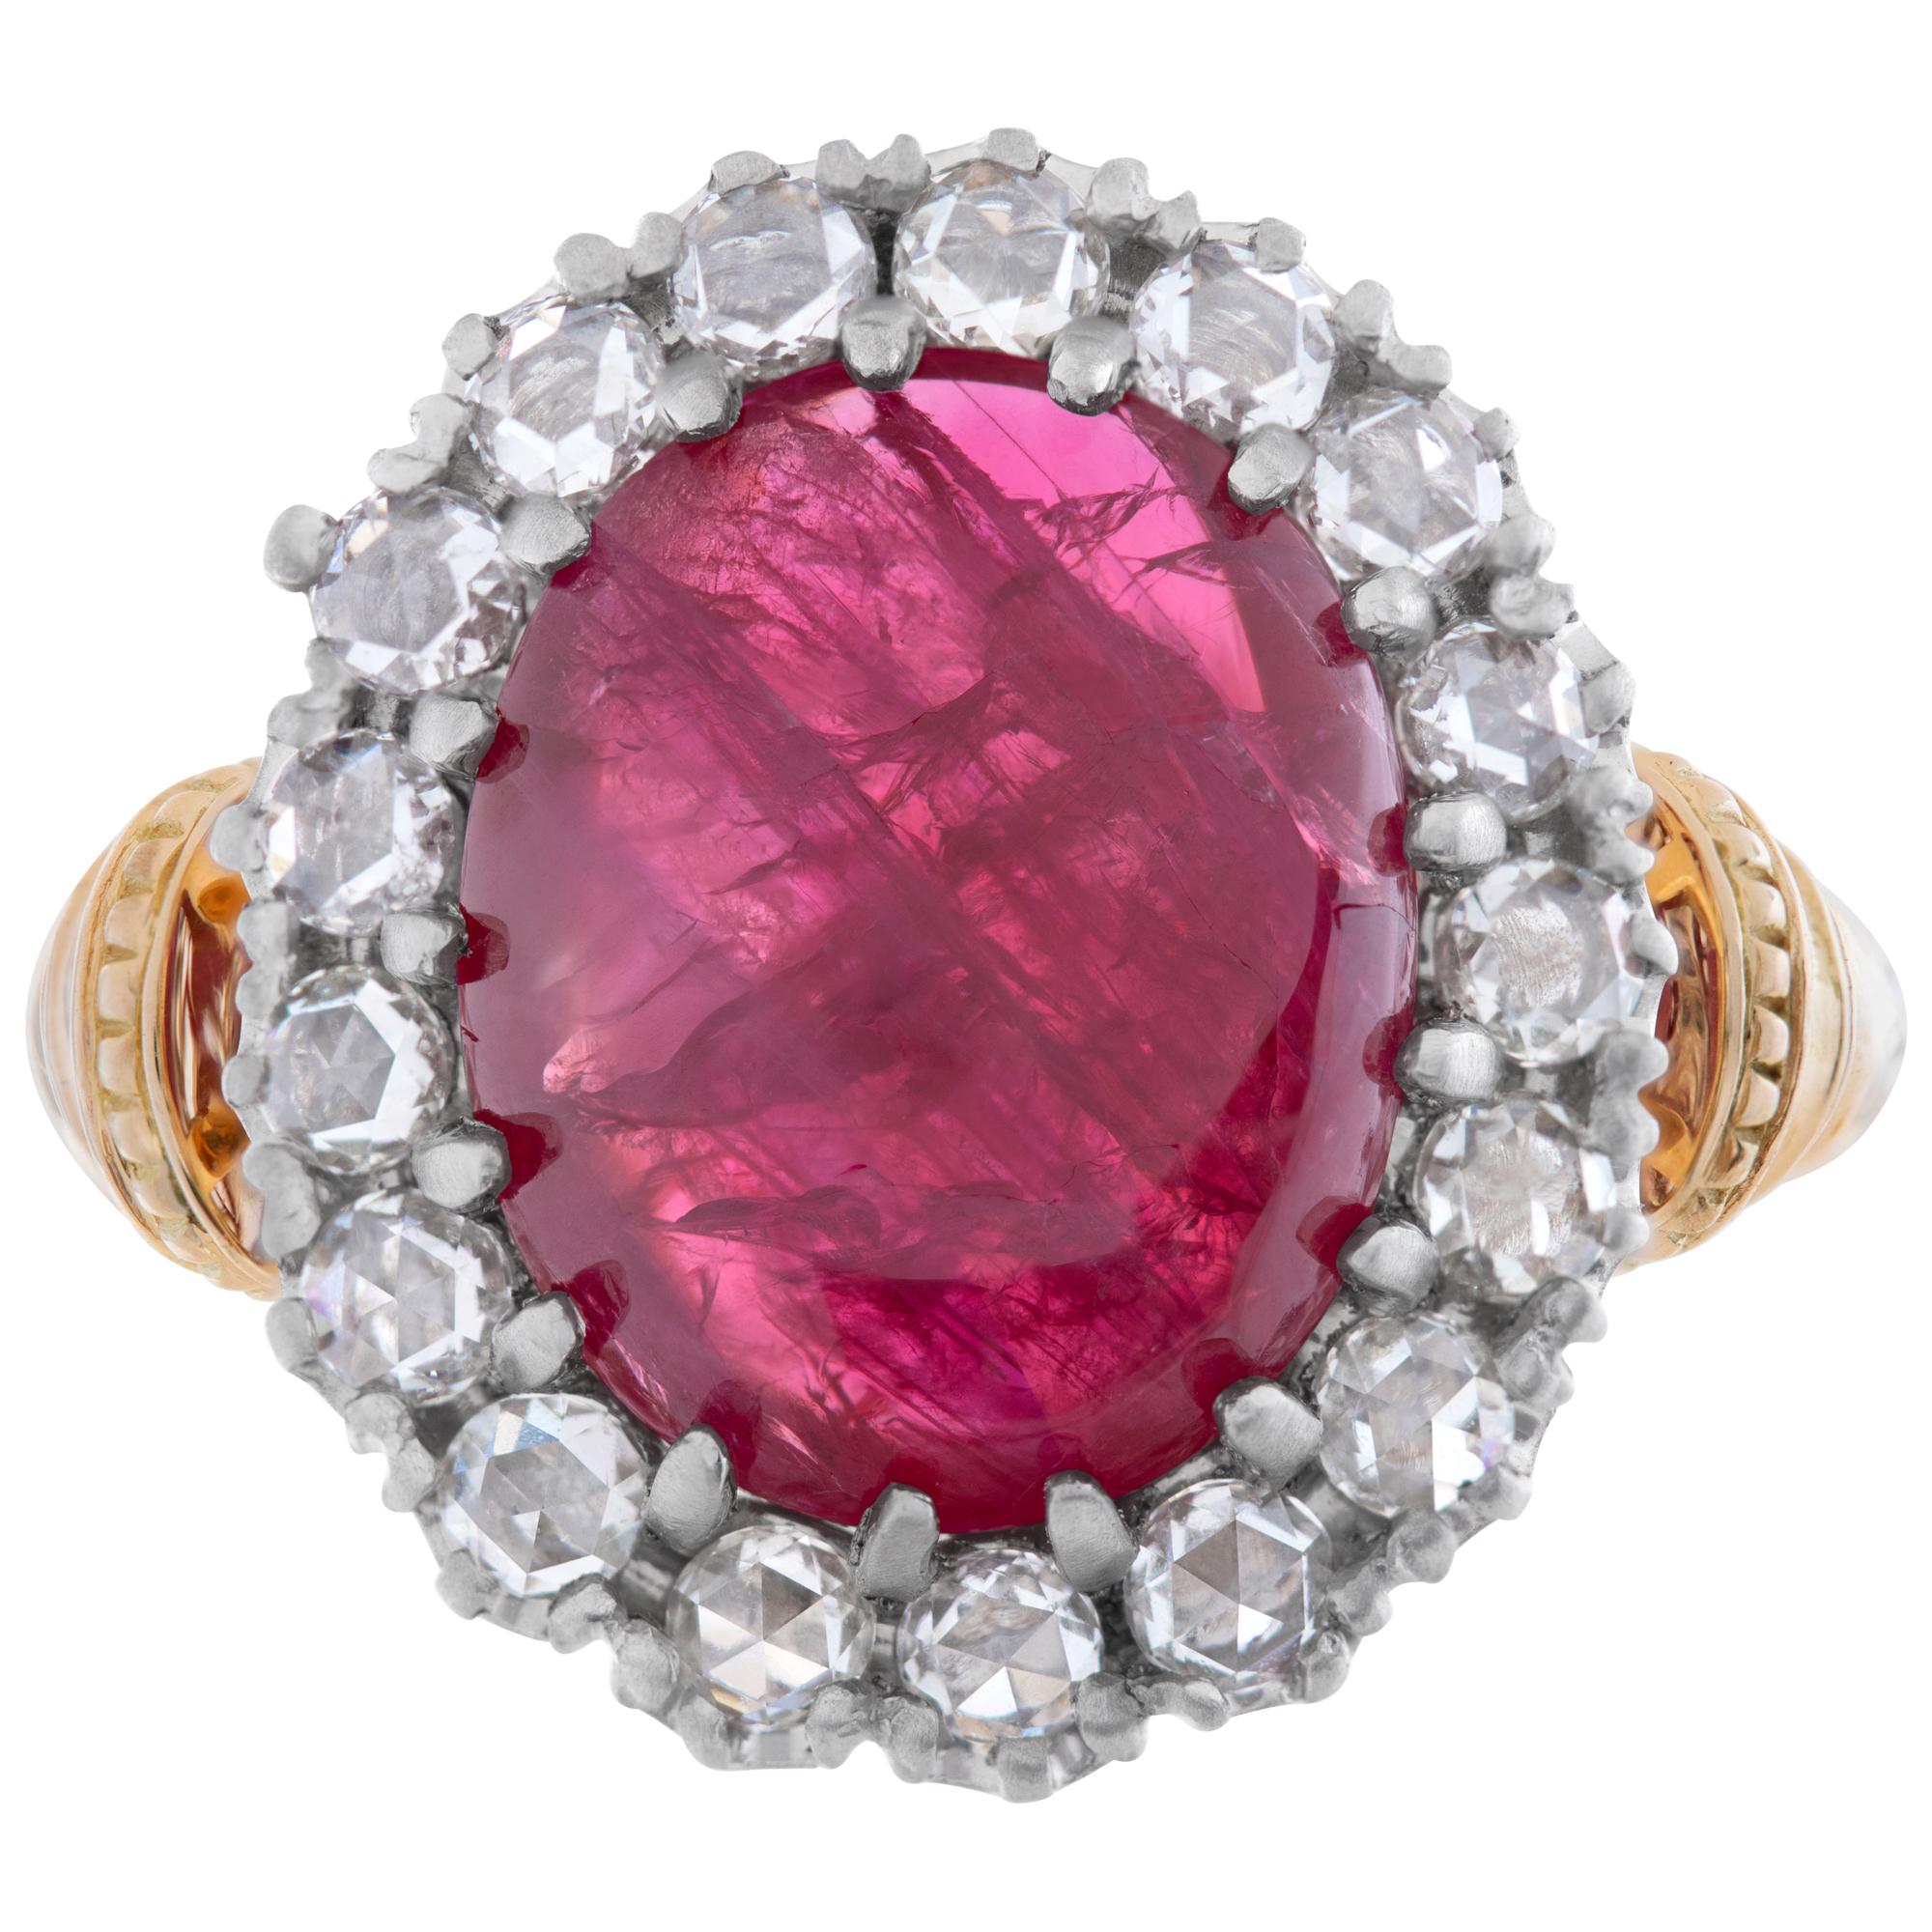 GIA certified Cabochon Burma no heat Ruby ring with rose cut diamond halo set in 18k yellow gold. Ruby is 6.21 cts and 1.40 carats diamonds G-H color, VS clarity. Size 6This Ruby ring is currently size 6 and some items can be sized up or down,